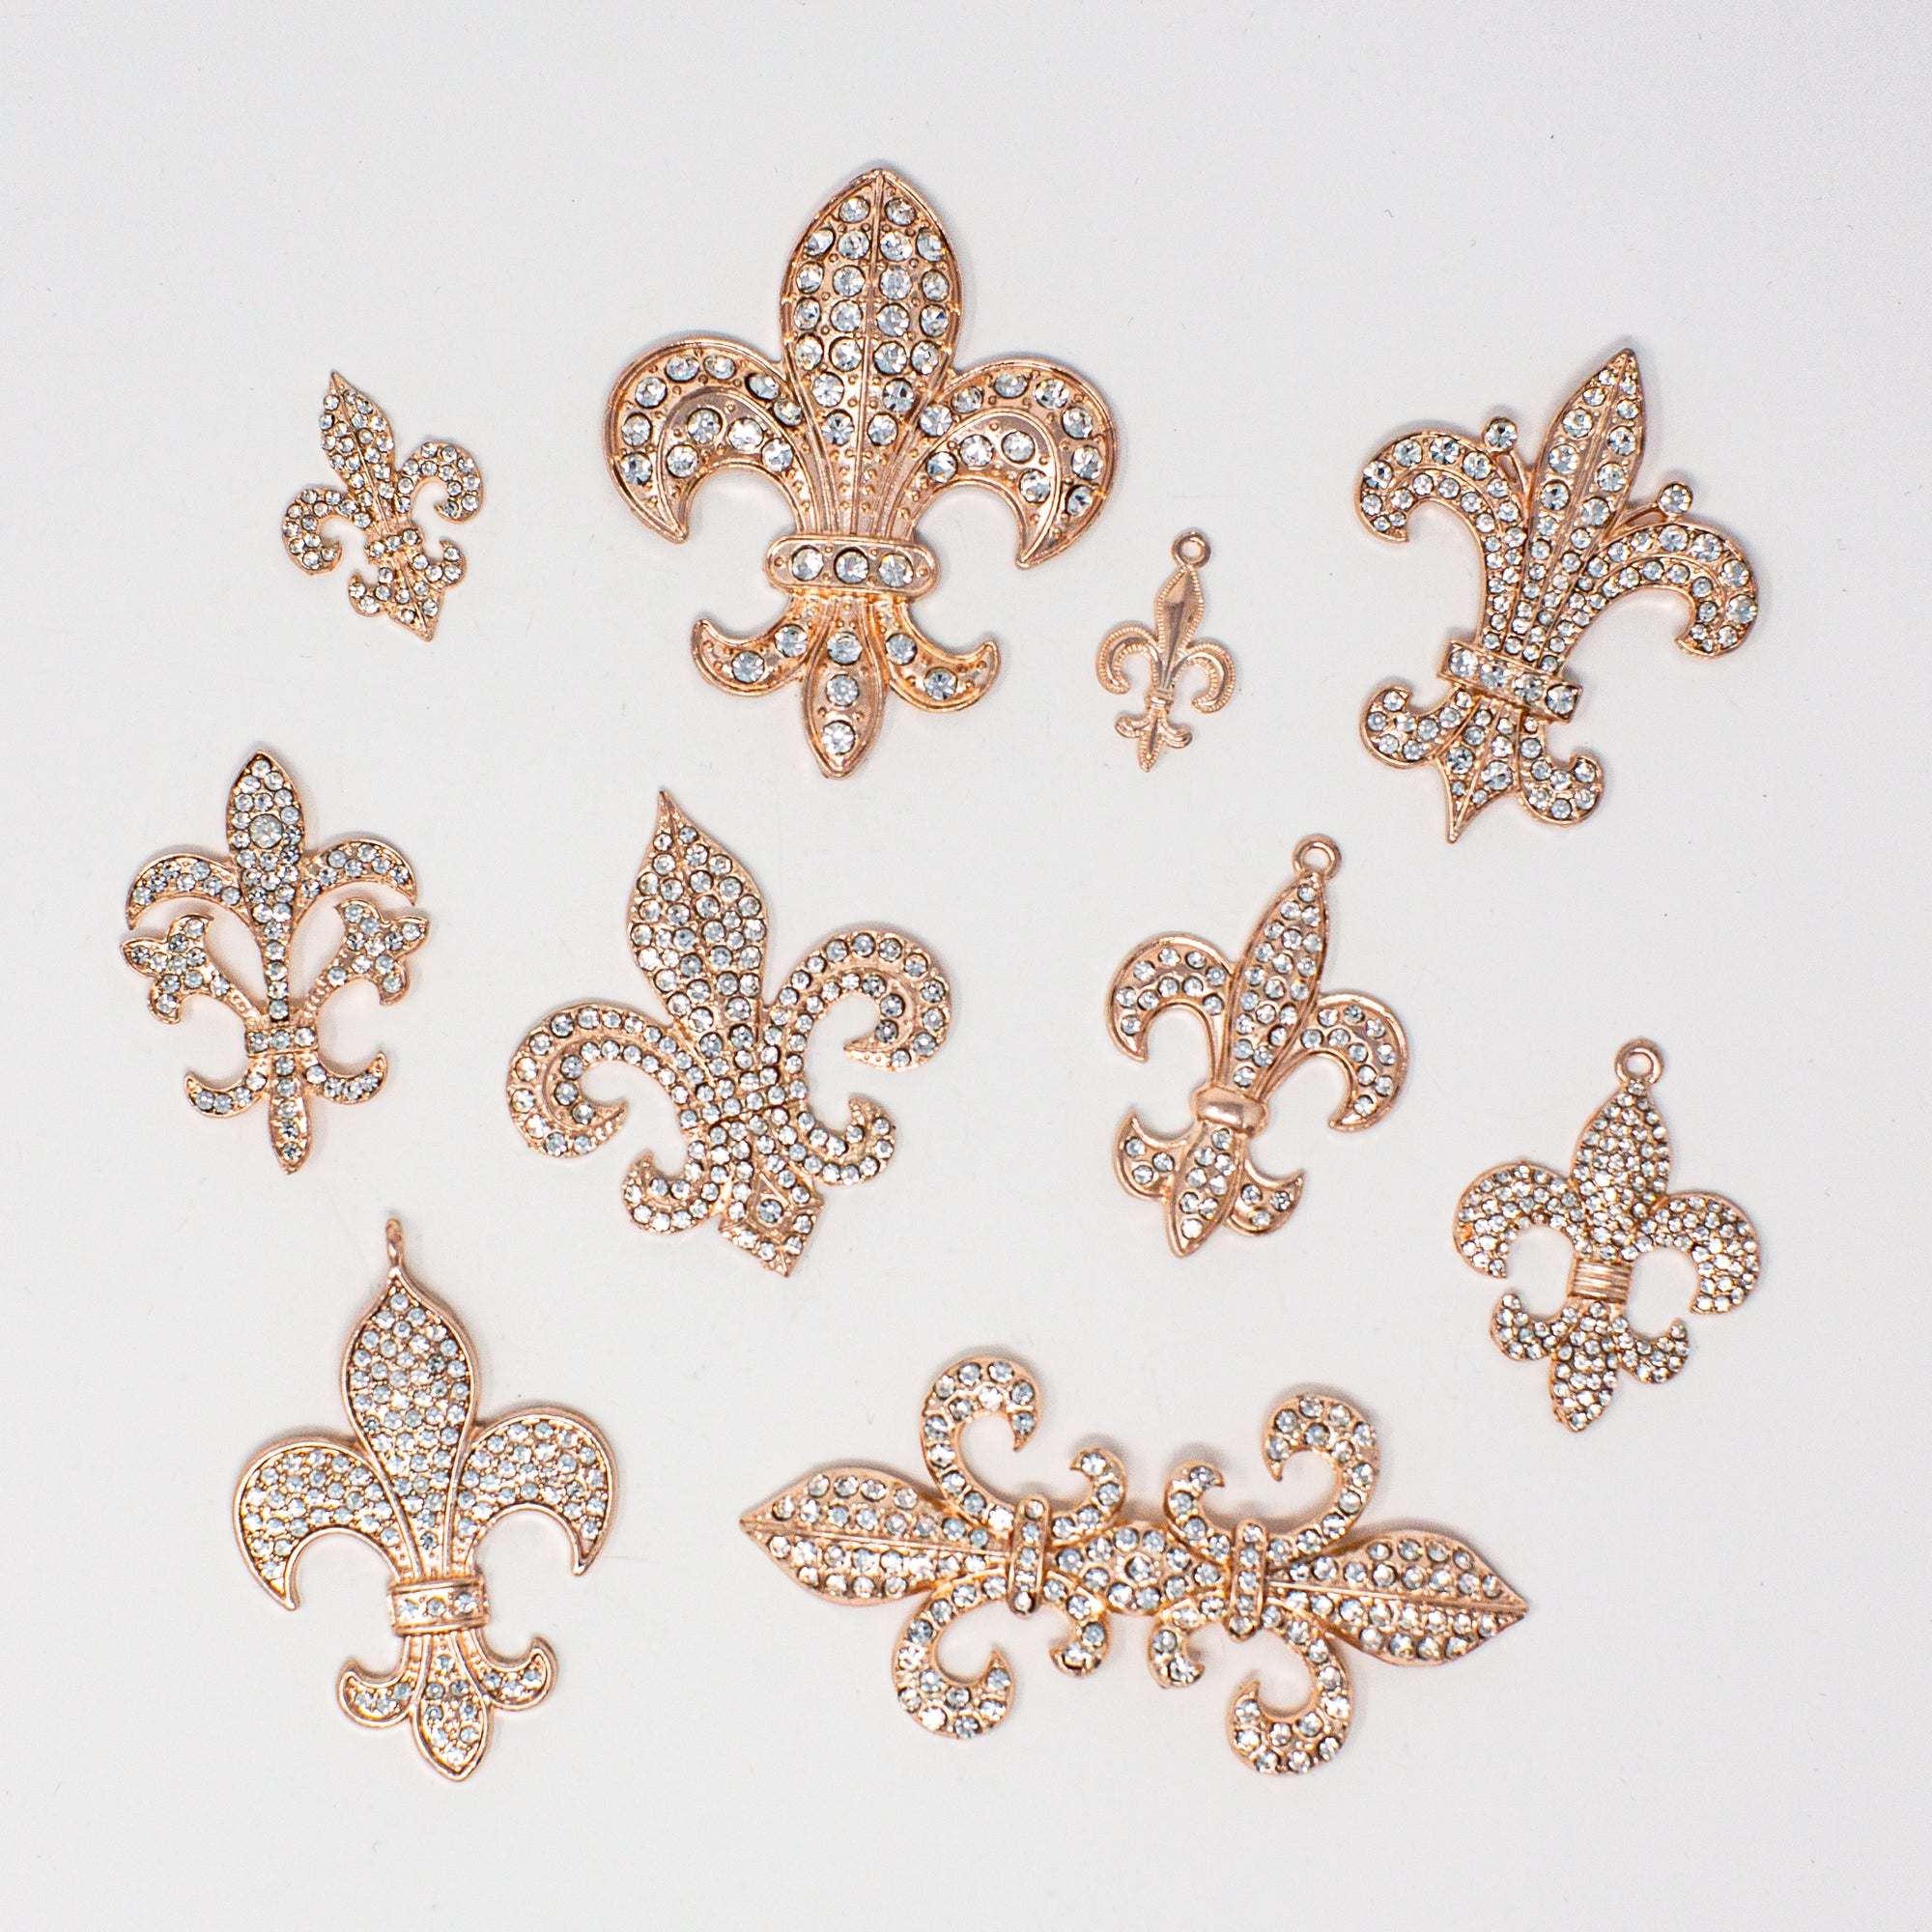 fleur de lis embellishments for crafts and diys french style bling embellishments rose gold